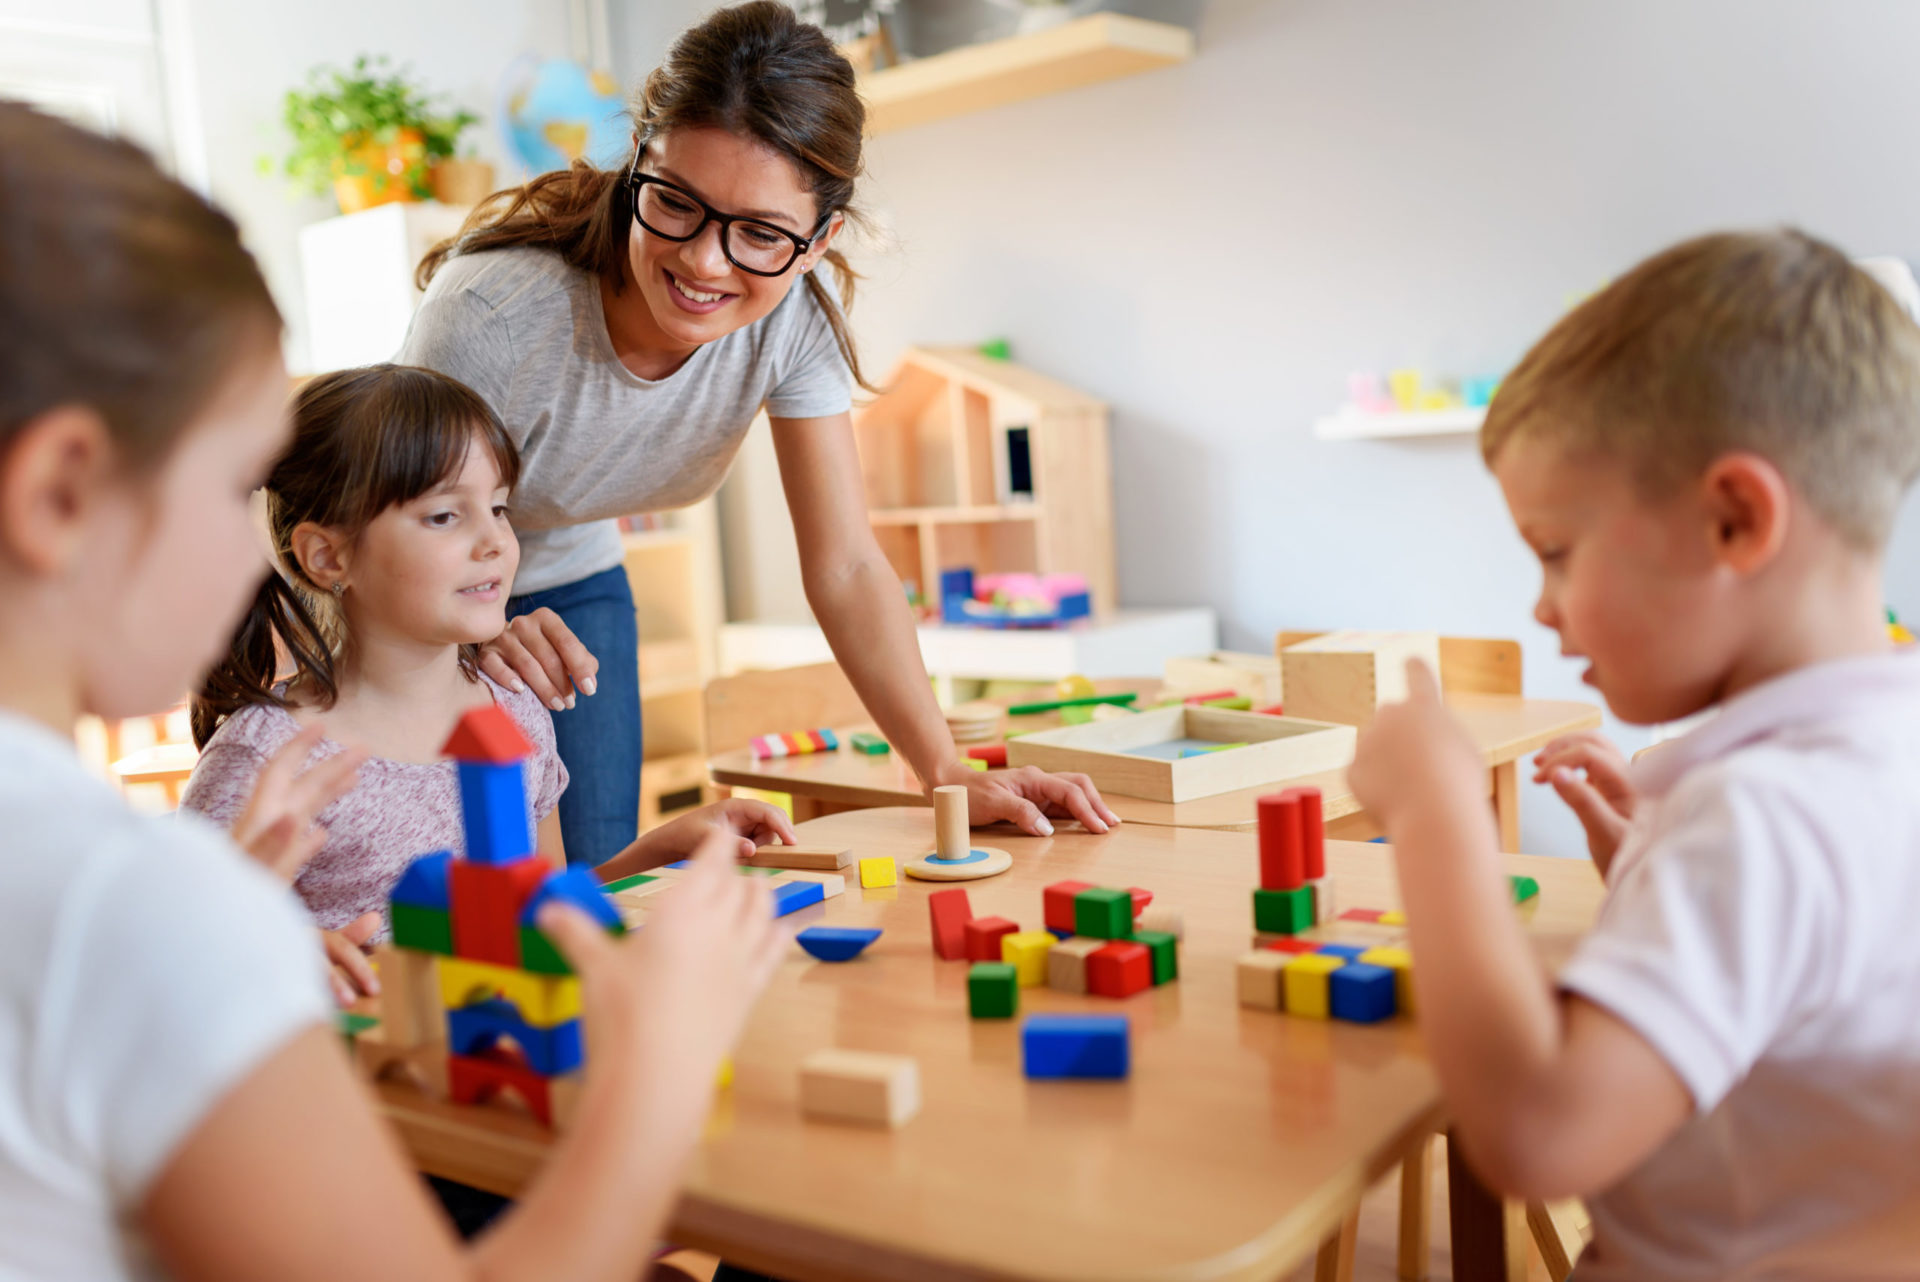 Preschool teacher with children playing with colorful wooden blocks